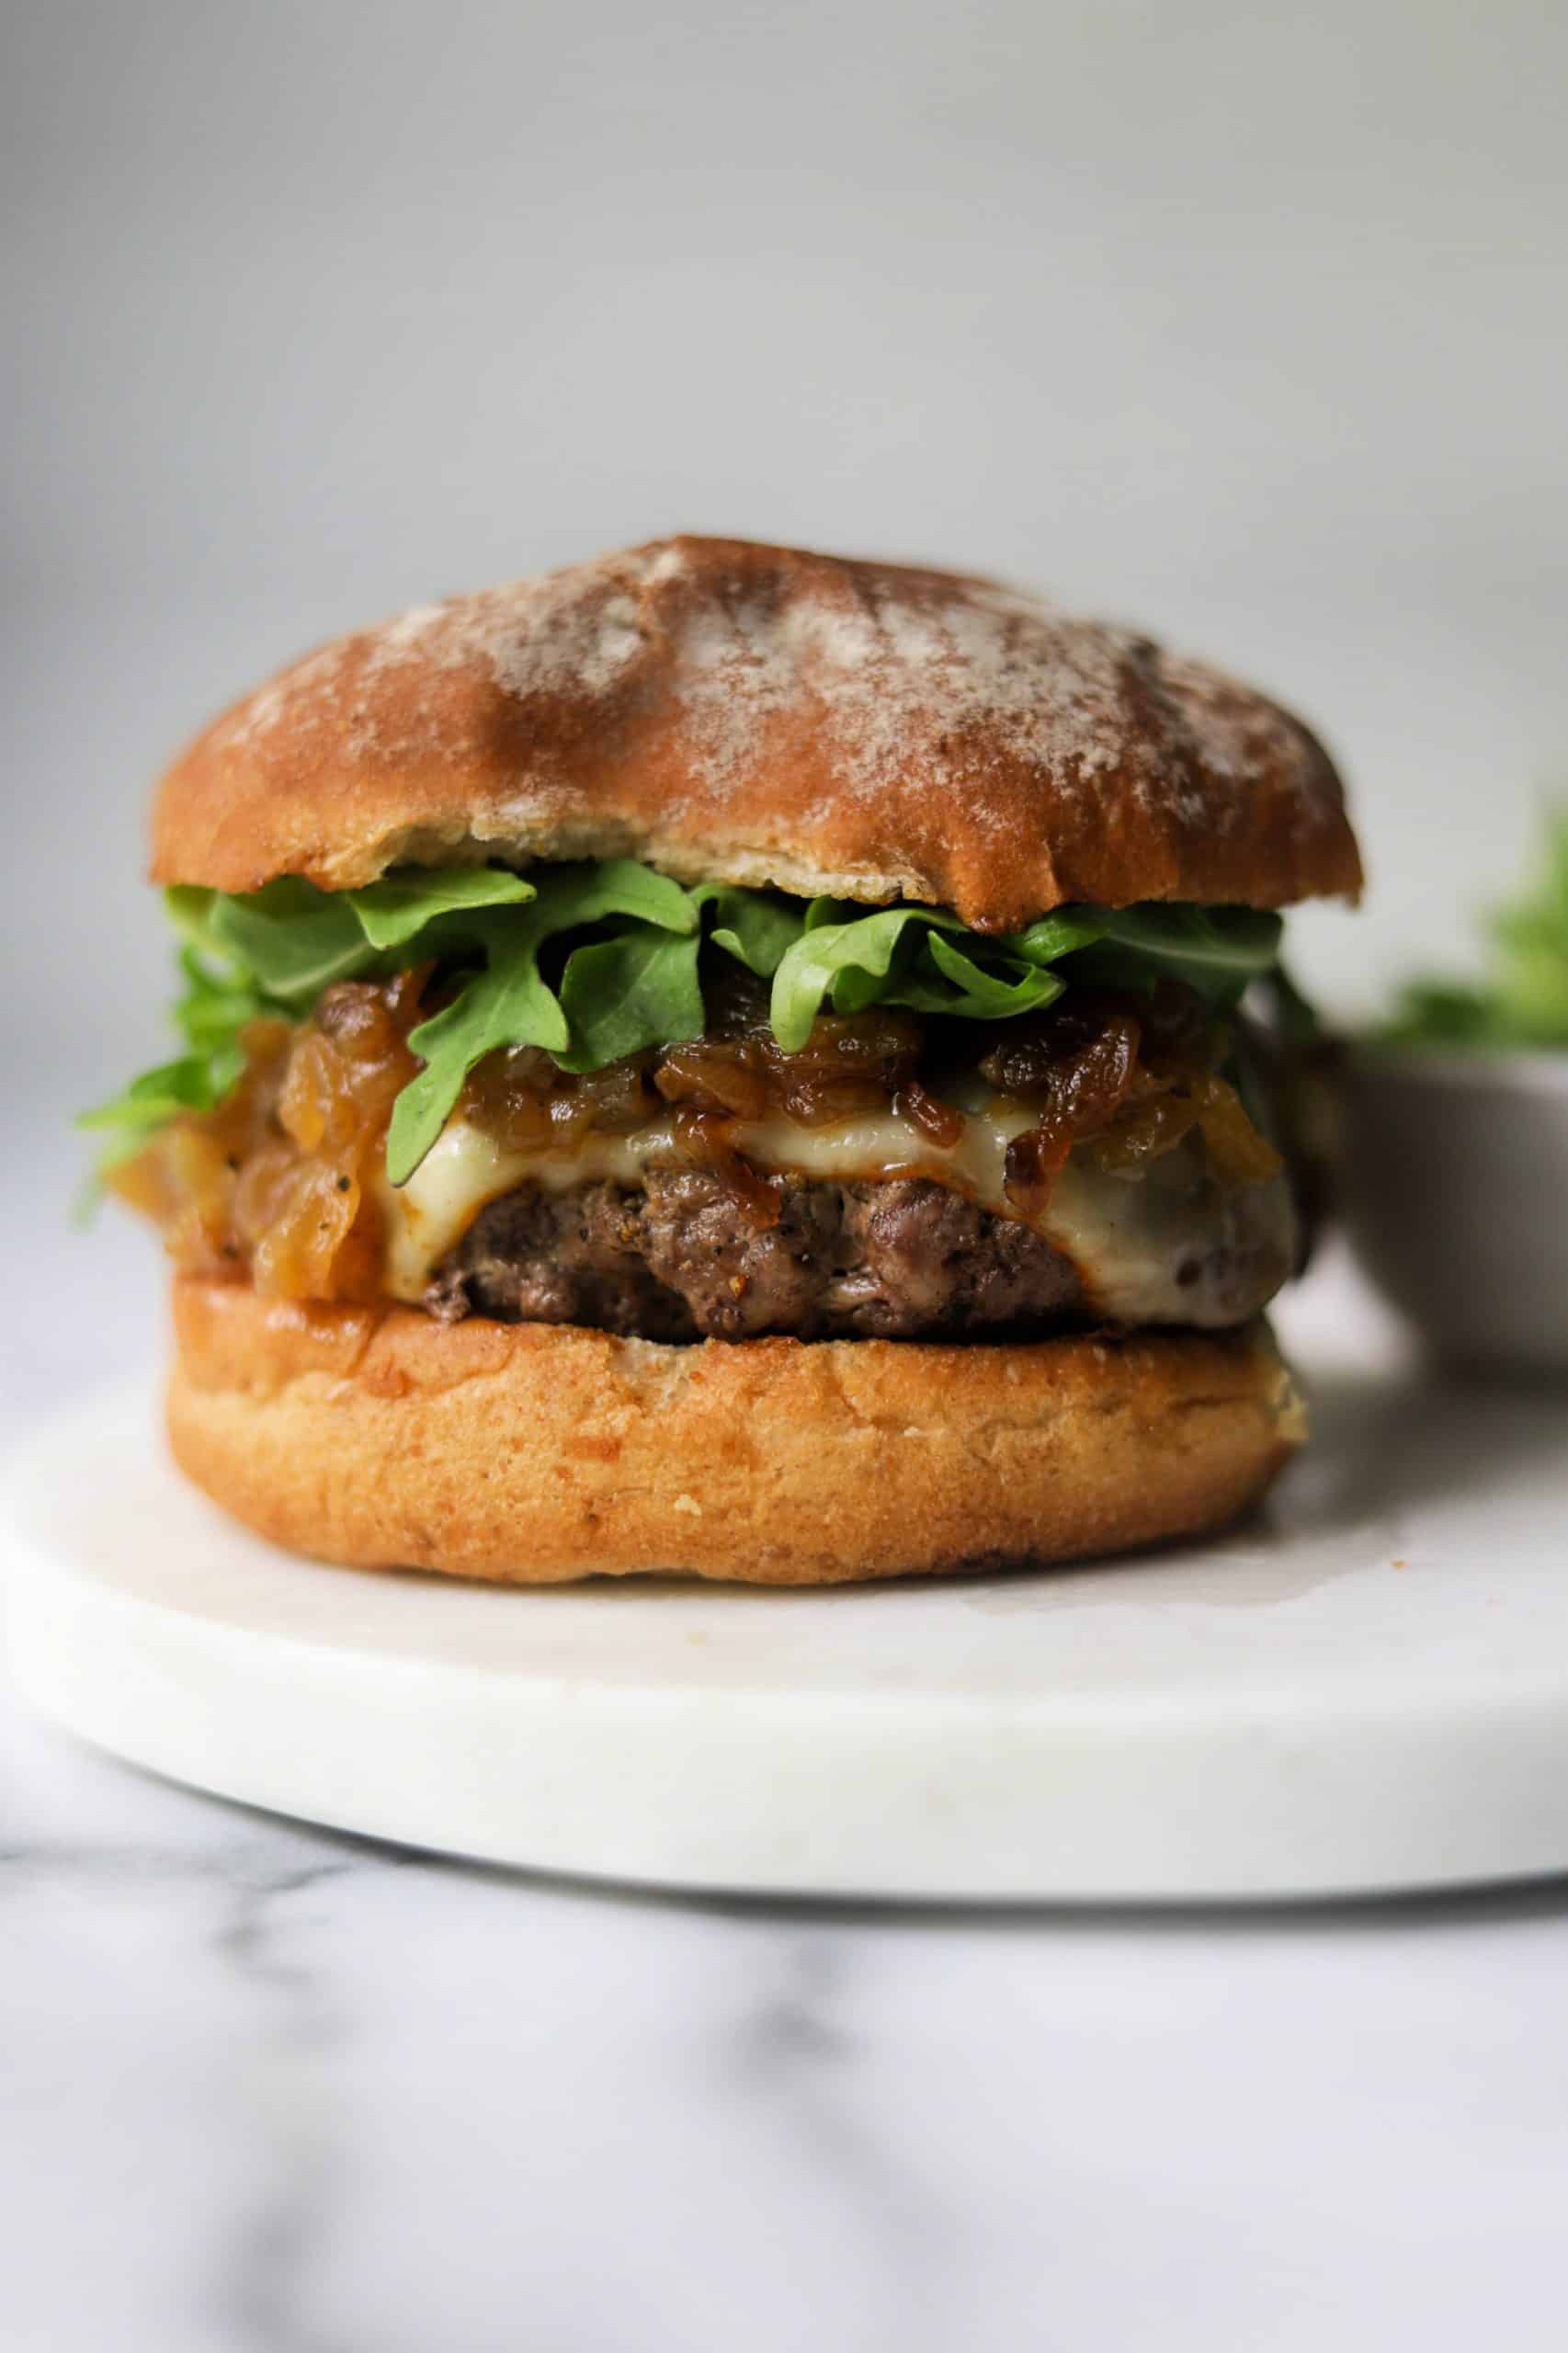 A side shot of a burger with caramelized onions and arugula.